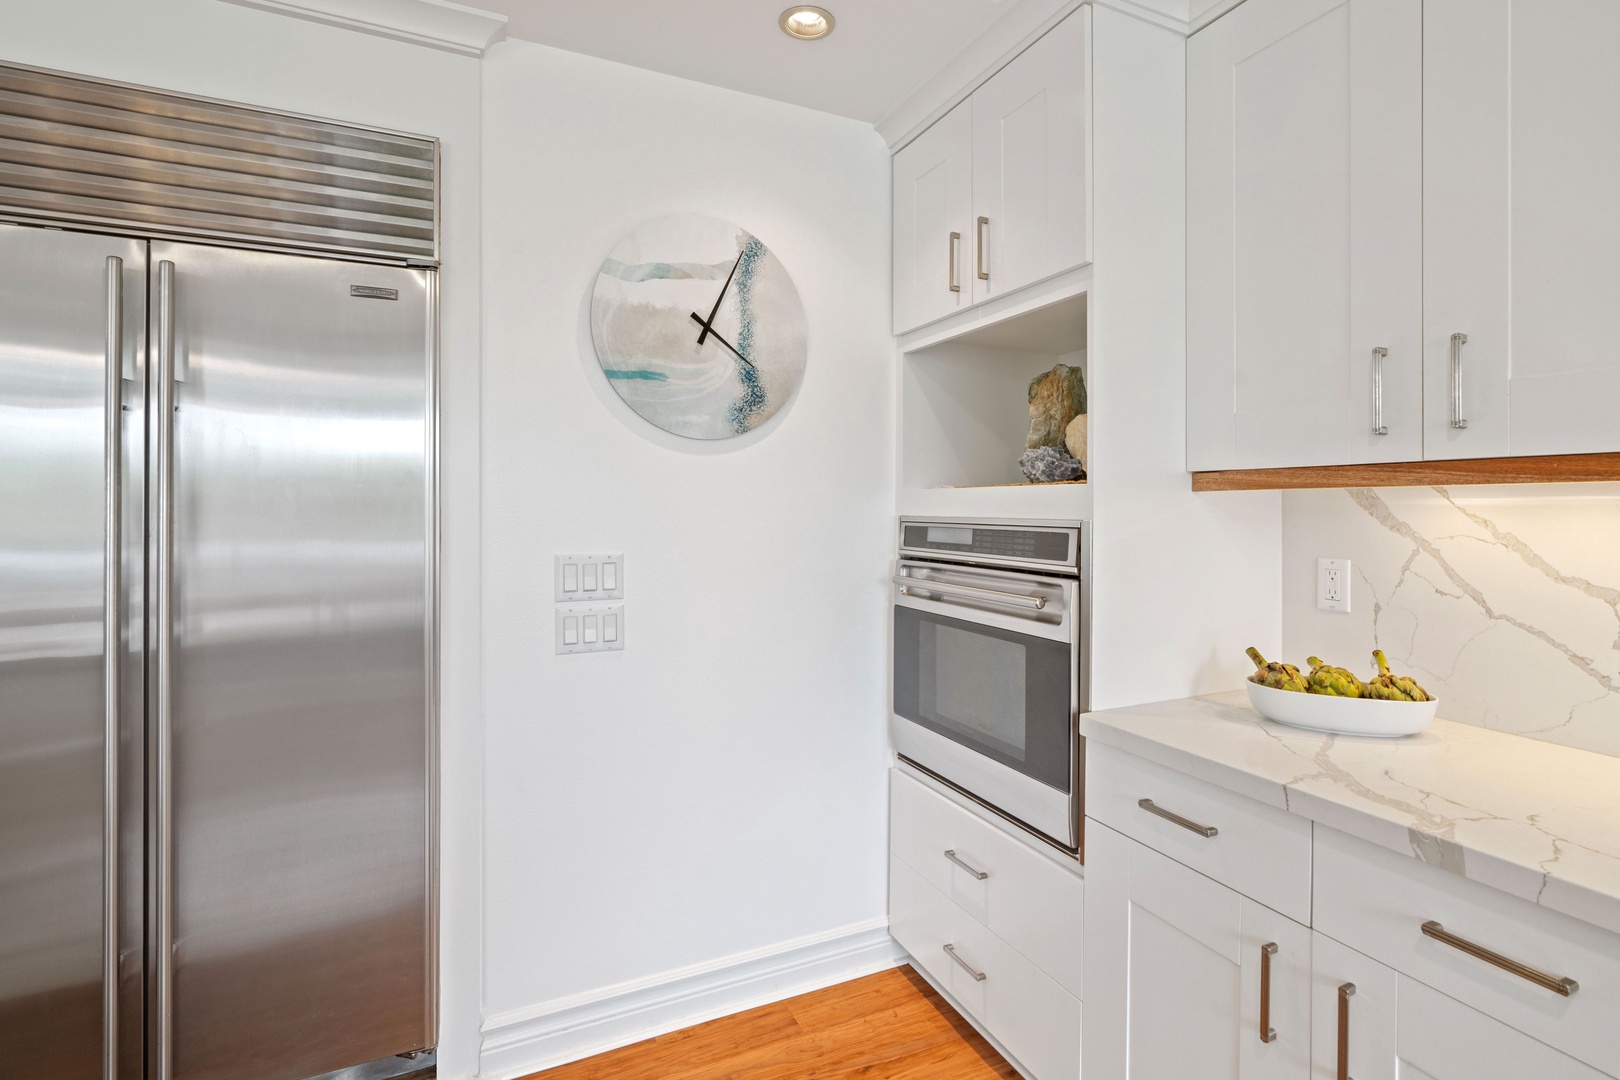 Princeville Vacation Rentals, Tropical Elegance - Stay on time with this chic wall clock while preparing meals in a well-equipped kitchen, perfect for holiday stays.